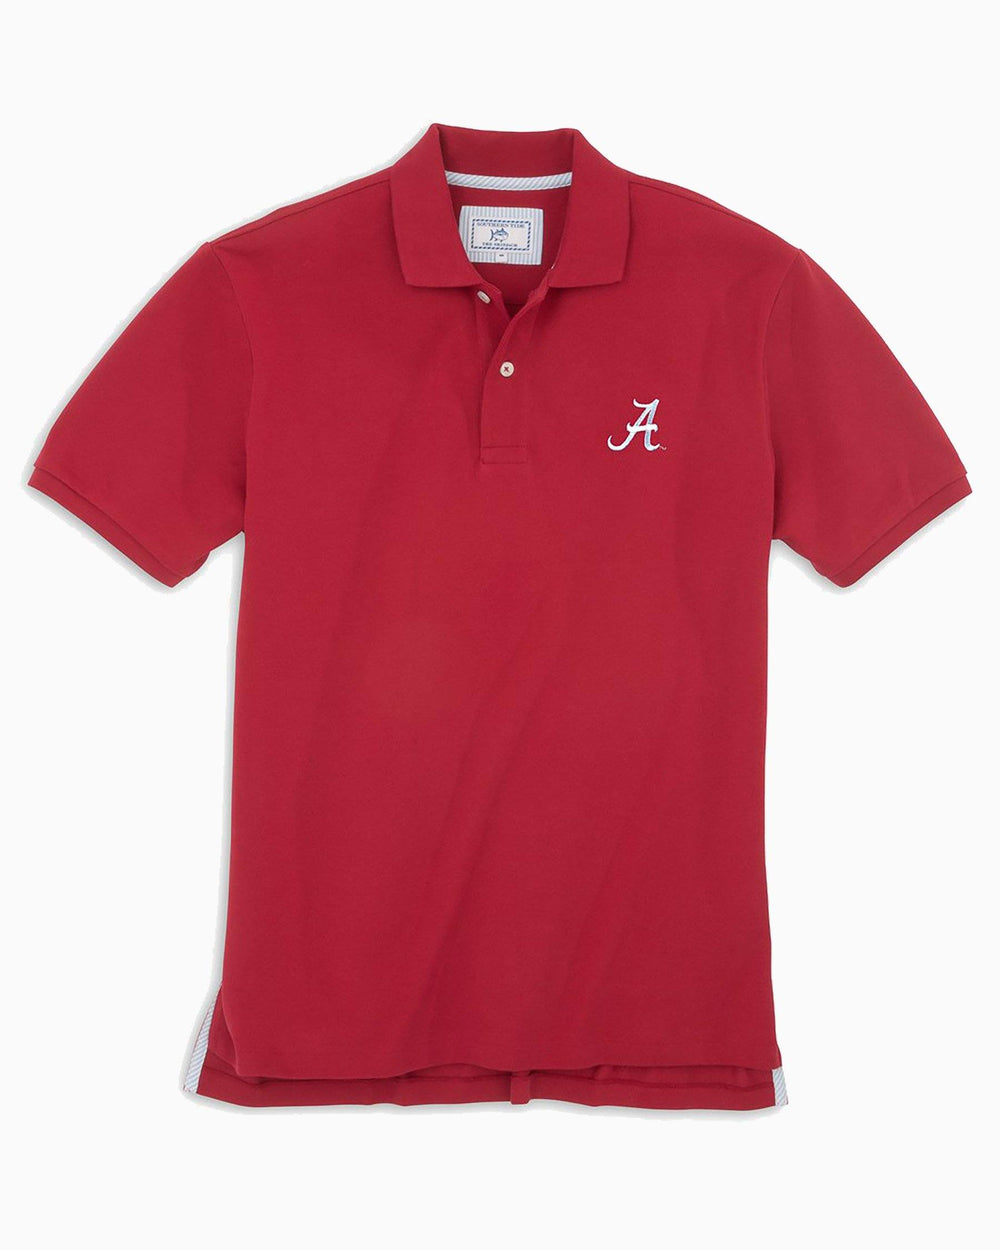 The front view of the Men's Red Alabama Crimson Tide Pique Polo Shirt by Southern Tide - Crimson